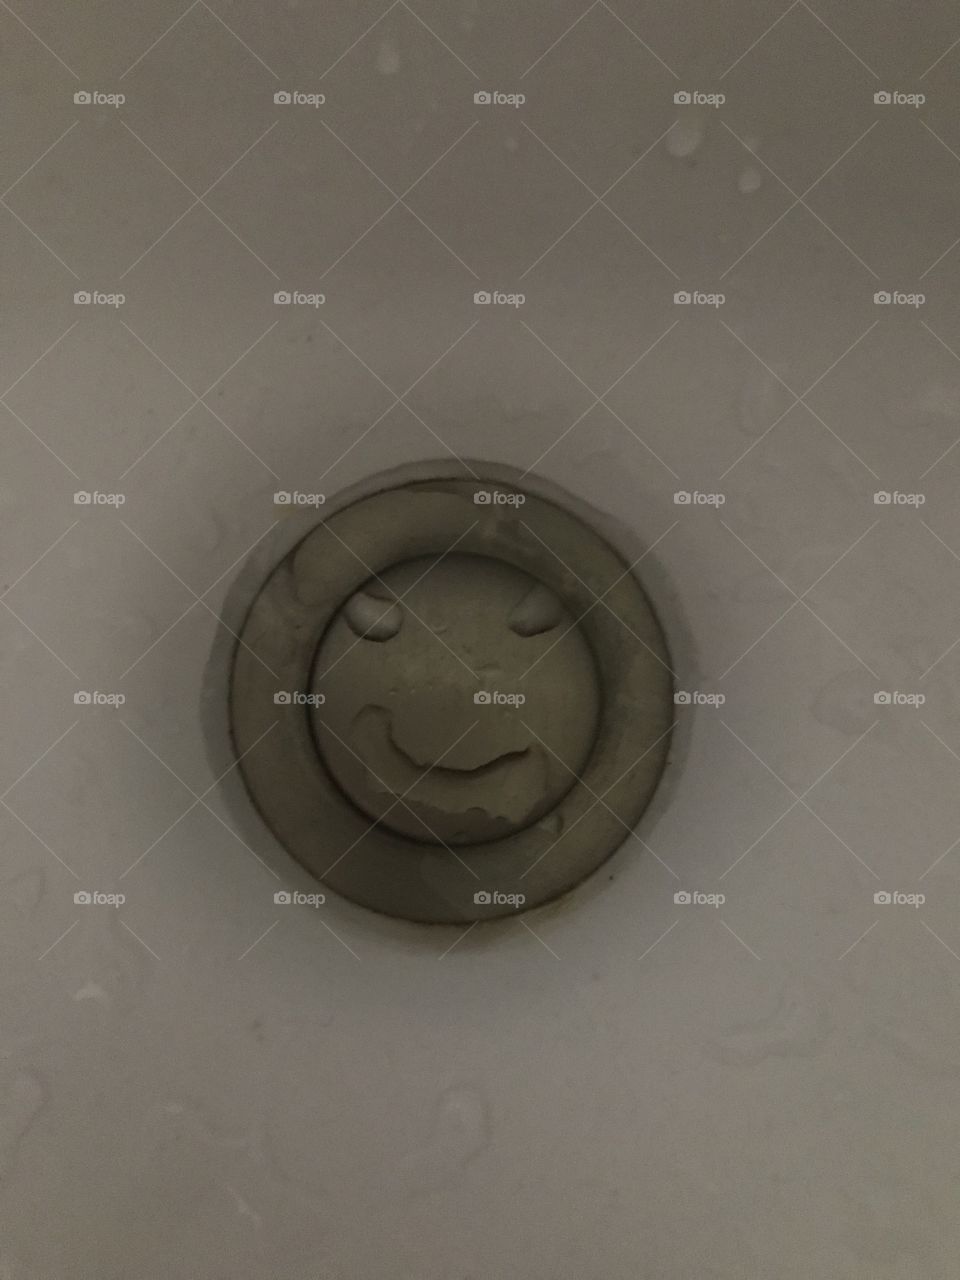 When your sink tells you to have a good day